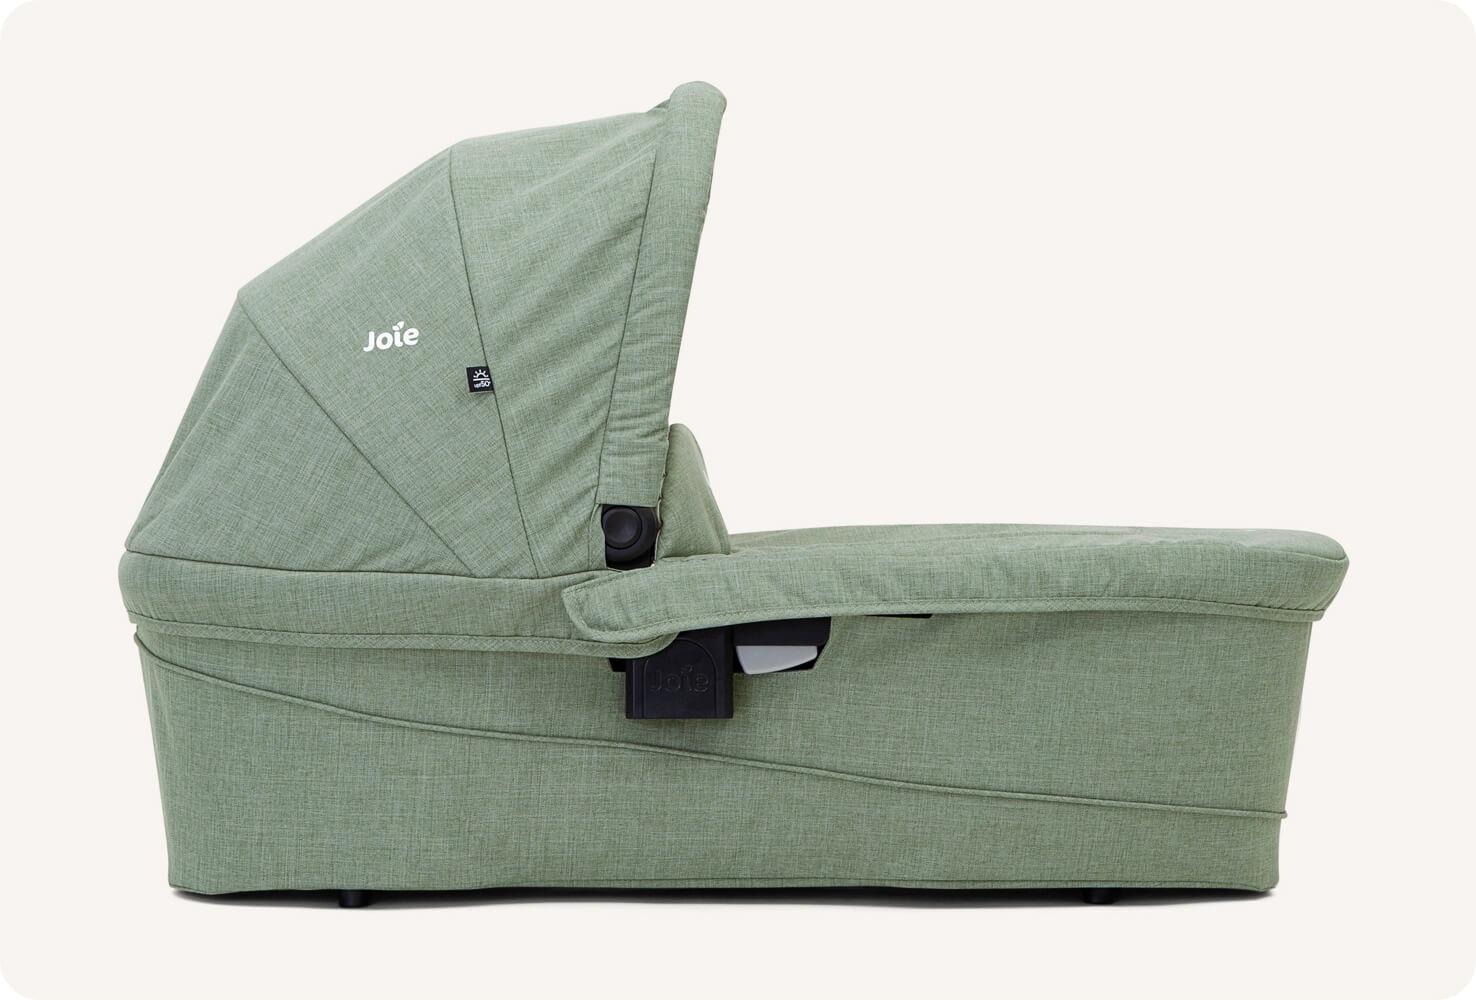  Joie Ramble xl carry cot in light green on side angle. 